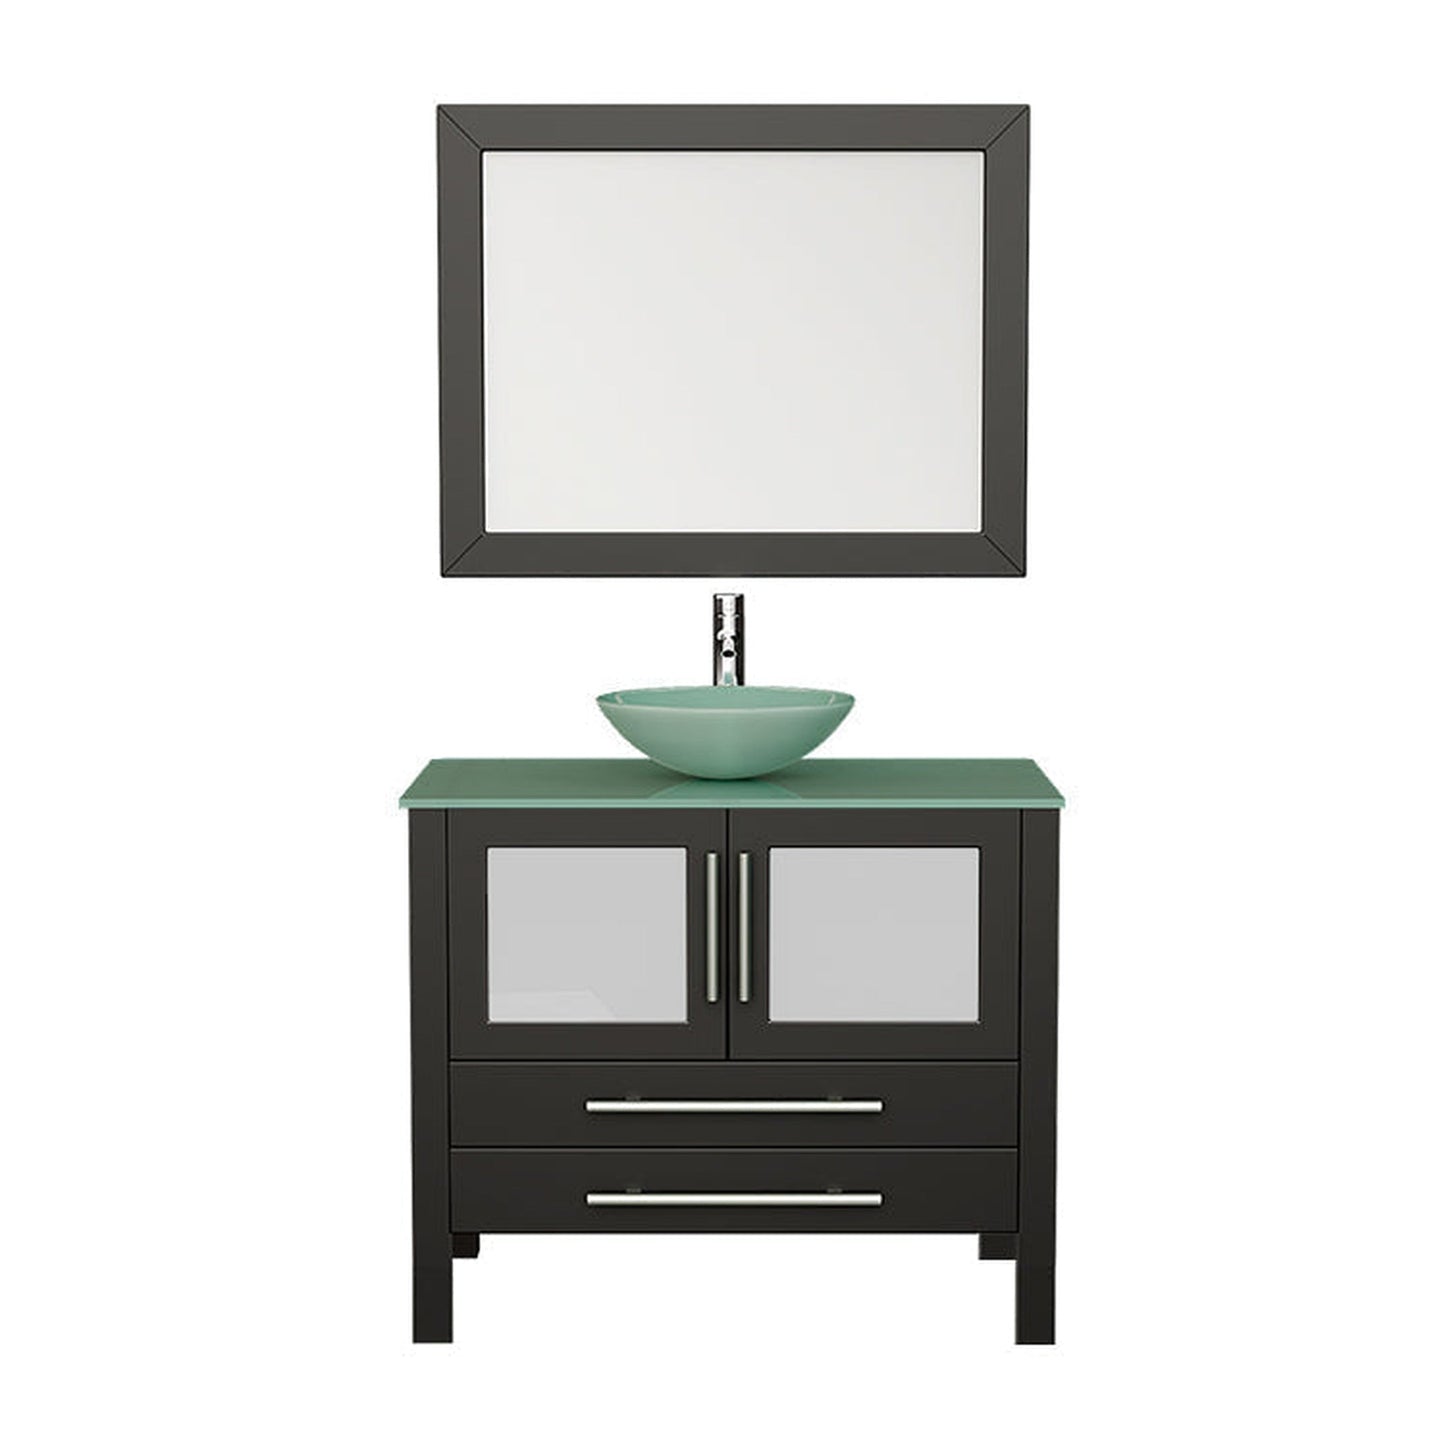 Cambridge Plumbing 36" Black Espresso Wood Single Vanity Set With Tempered Glass Countertop And Circular Vessel Sink With Polished Chrome Plumbing Finish